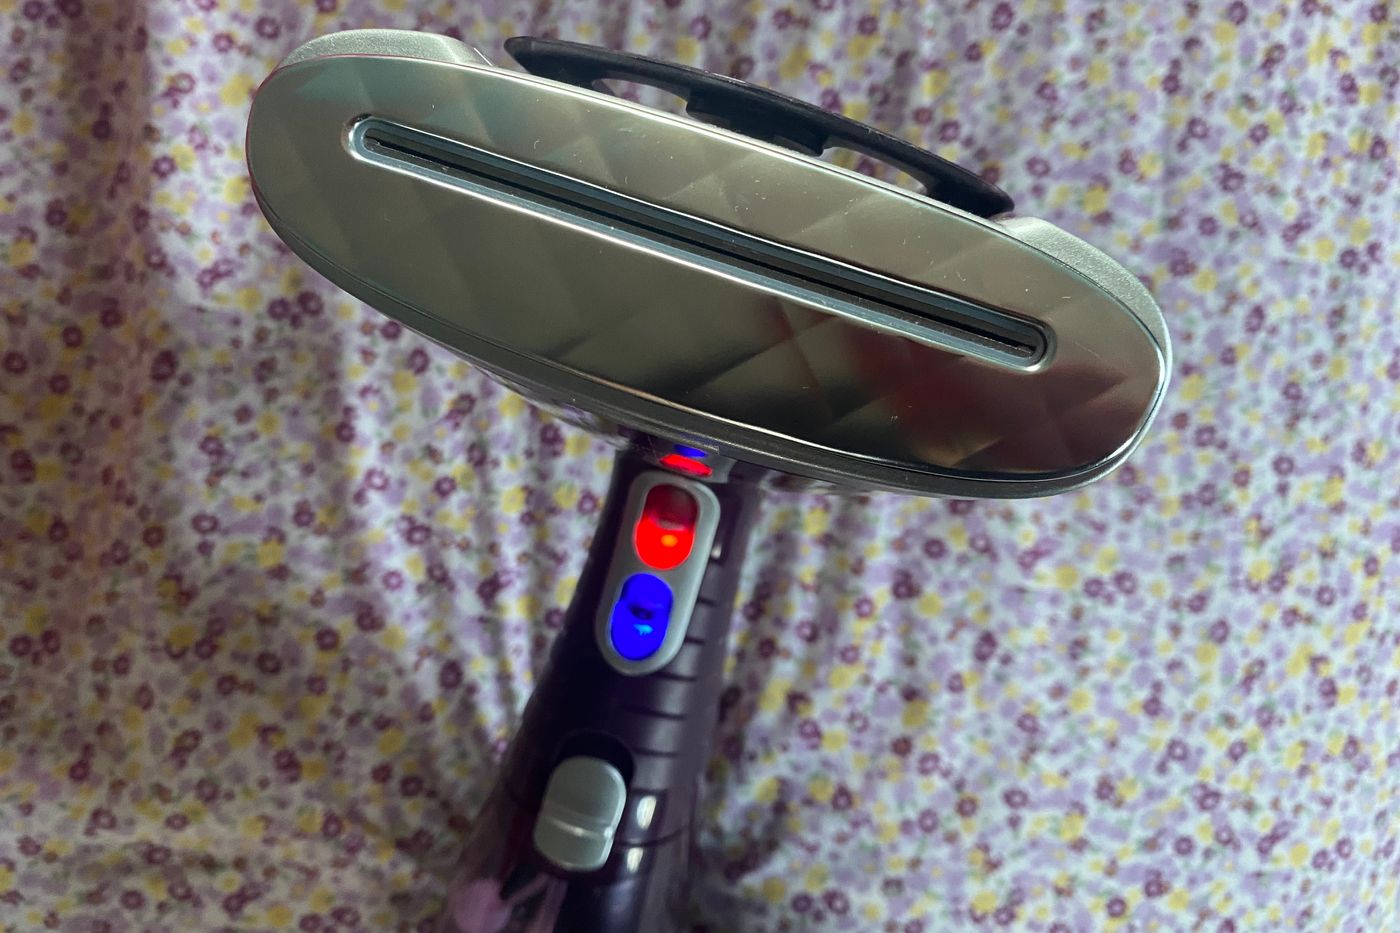 Conair Turbo Extreme Handheld Steamer Review 2022